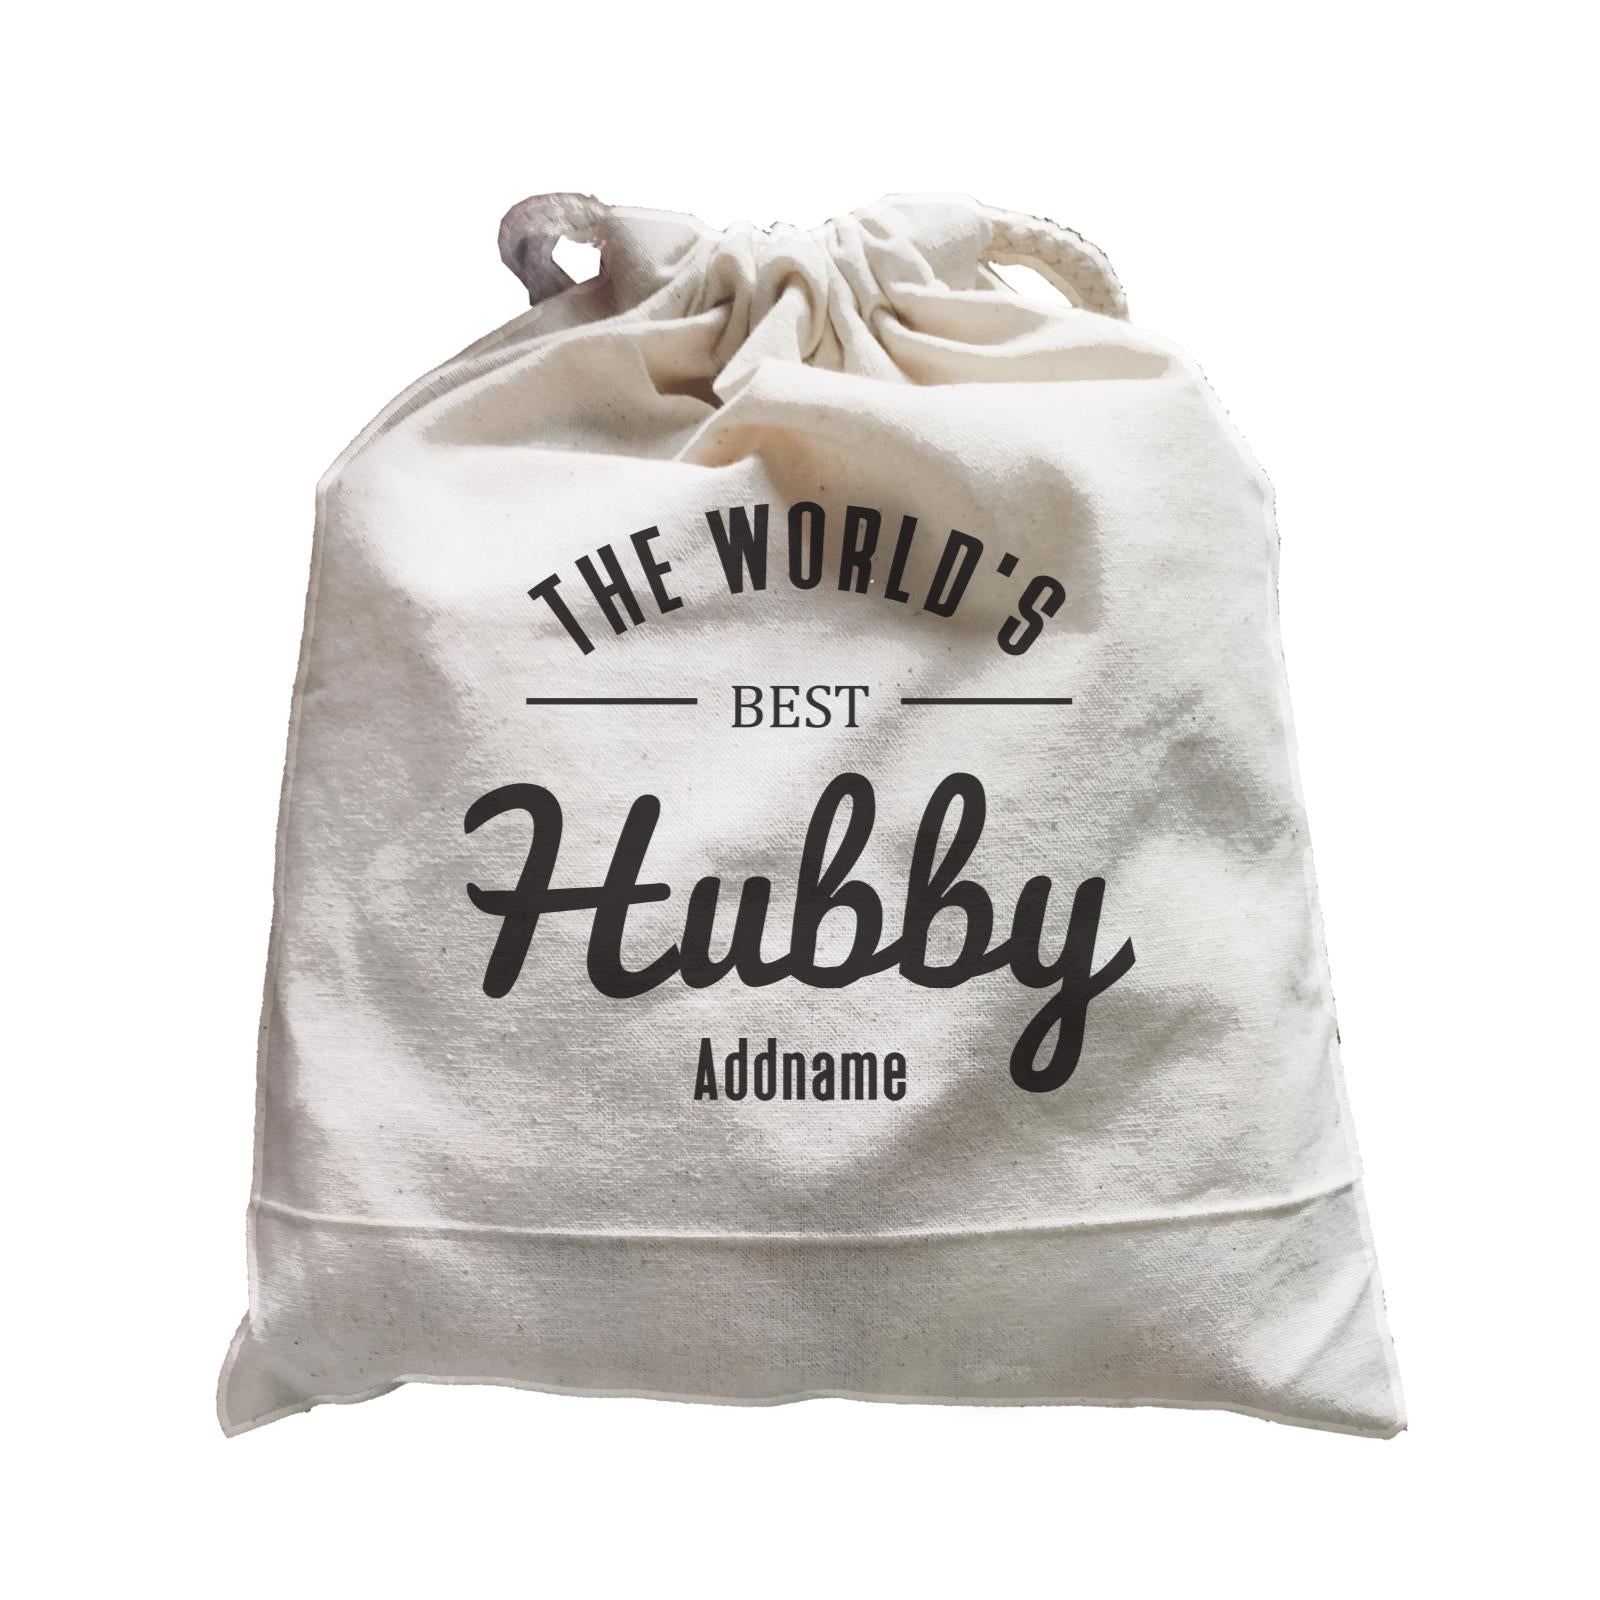 Husband and Wife The World's Best Hubby Addname Satchel